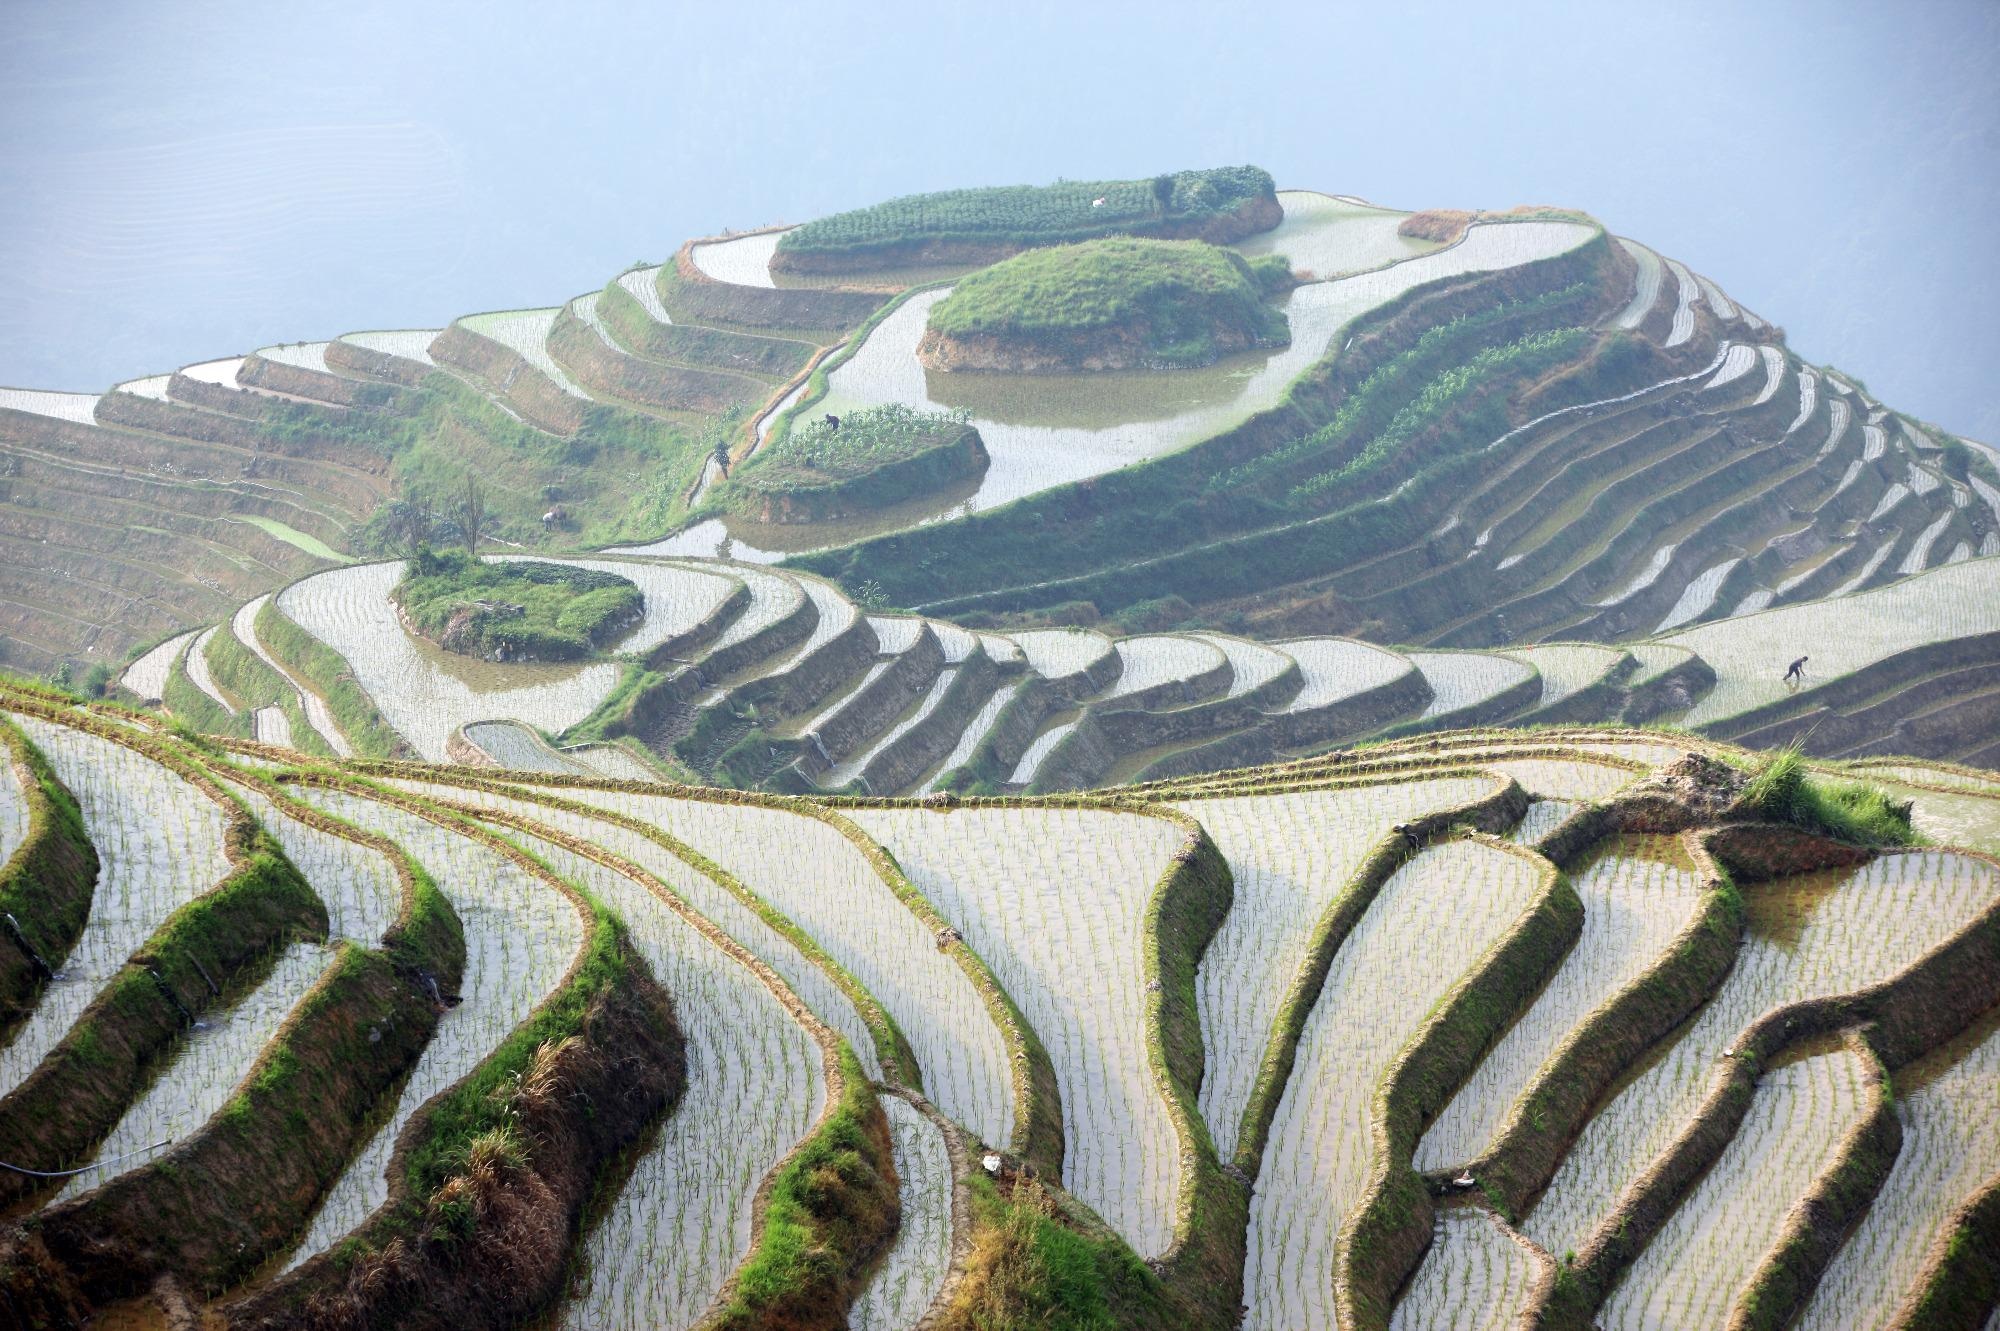 Future Food Security of China will have Huge Environmental Impacts, Finds Study.